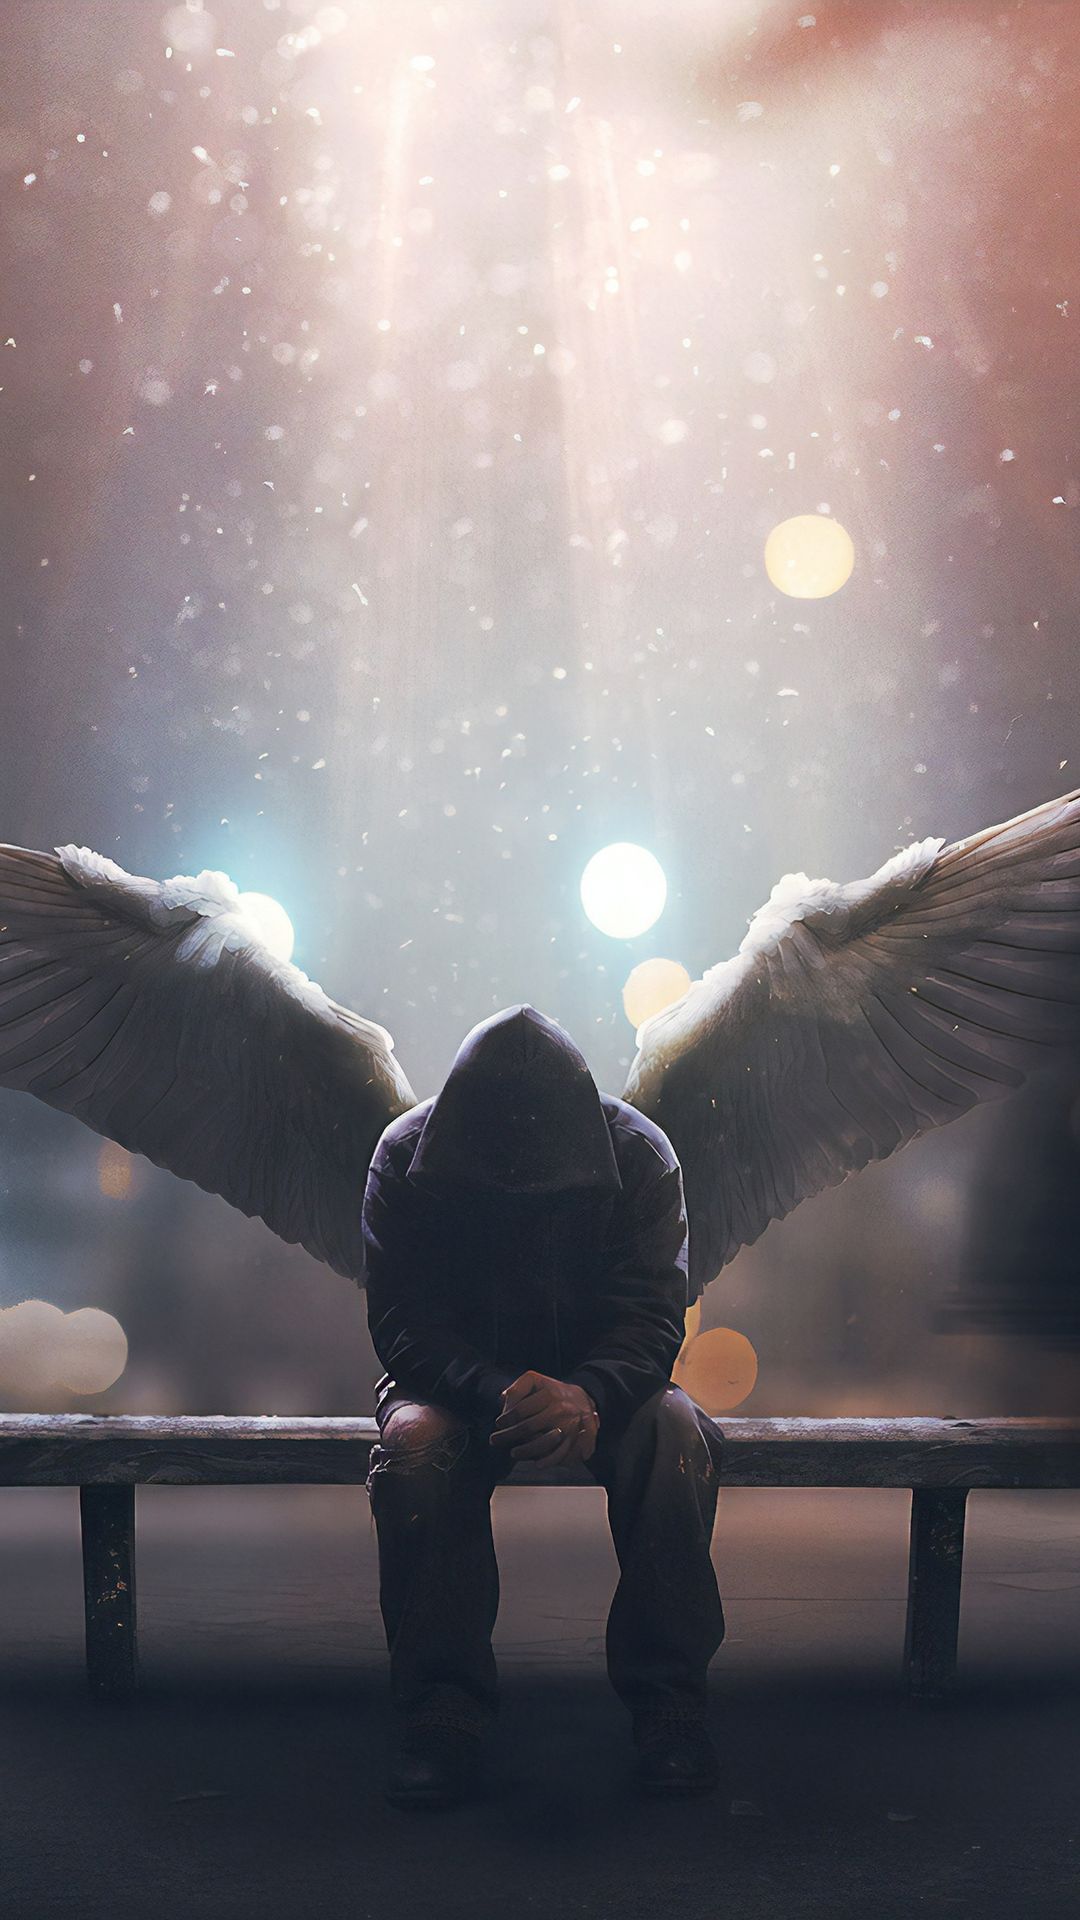 A person sitting on the bench with wings - Wings